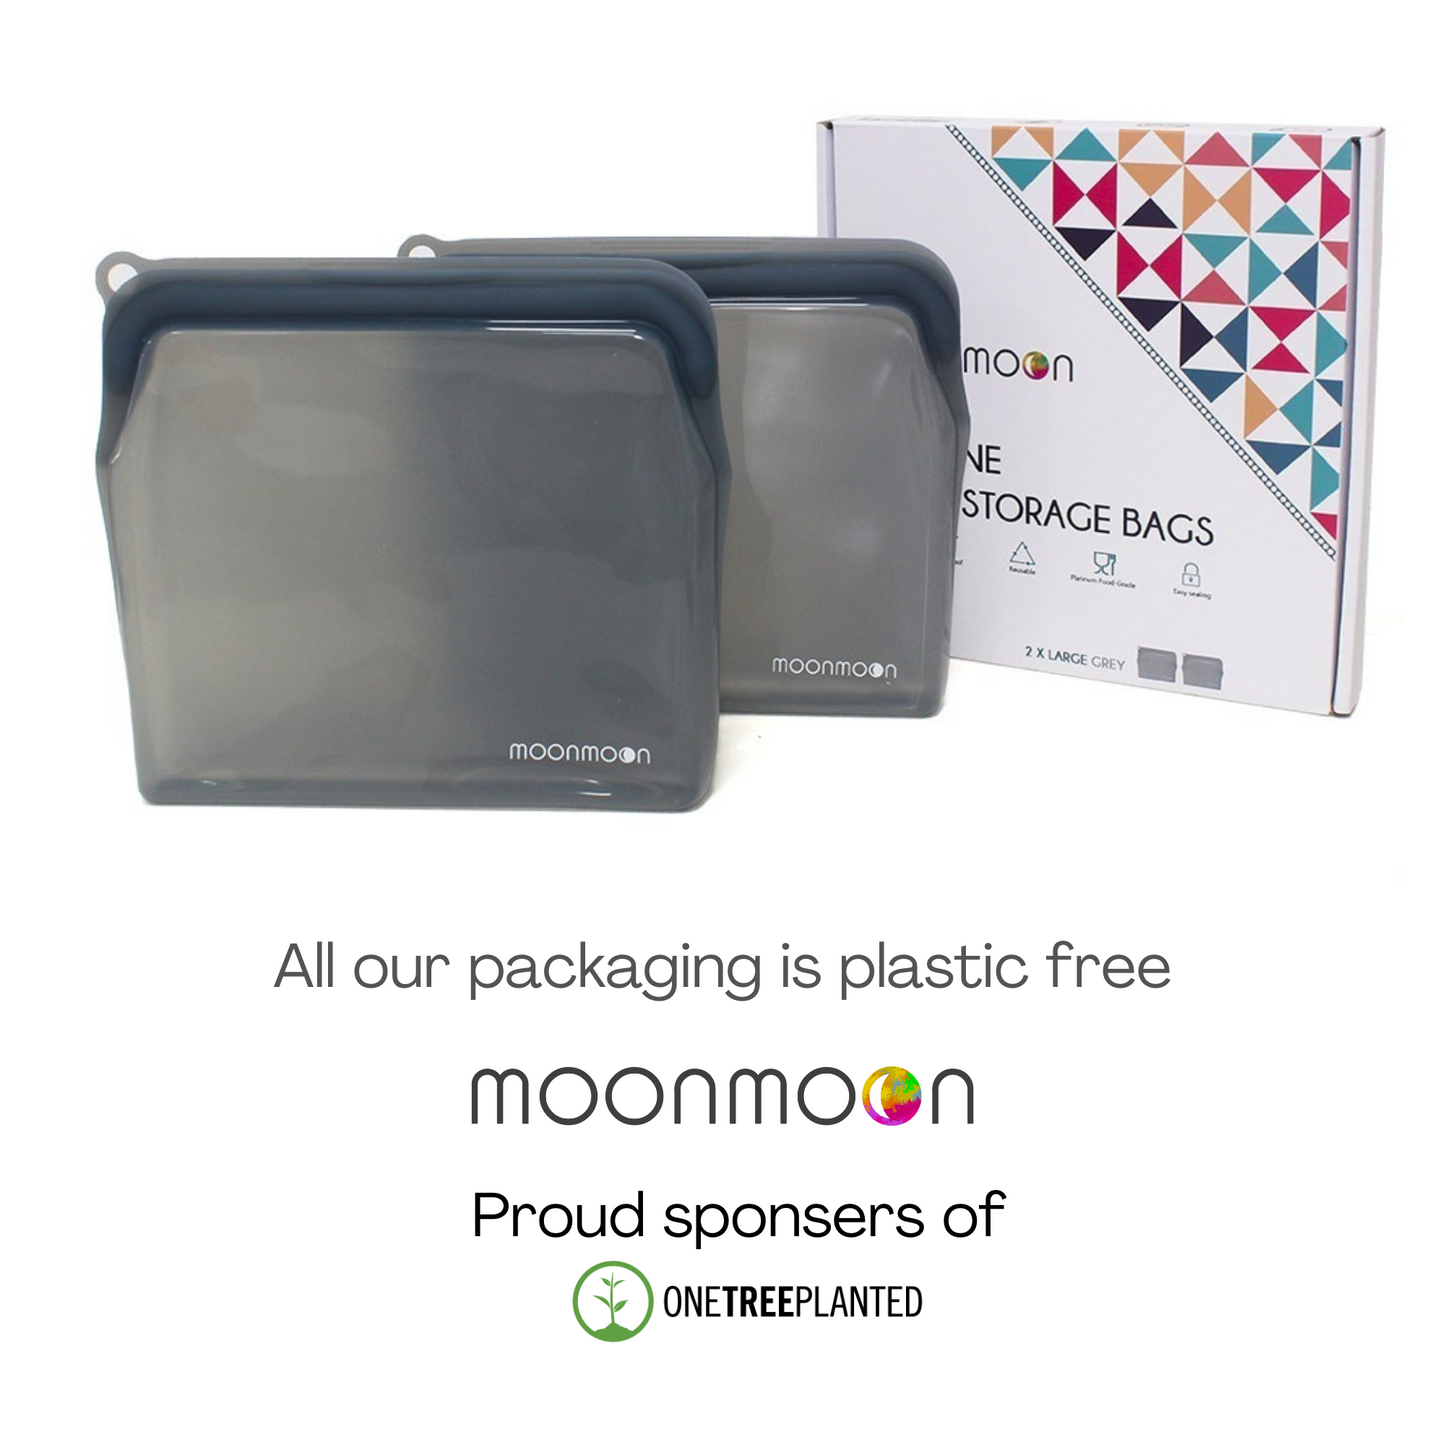 Moonmoon set of 2 silicone bags, Best reusable storage bags, reusable silicone food bags reusable freezer bags silicone bags uk silicone ziplock bags, moonmoon bags price moonmoon bags review stasher bags uk moonmoon silicone bags review best reusable freezer bags